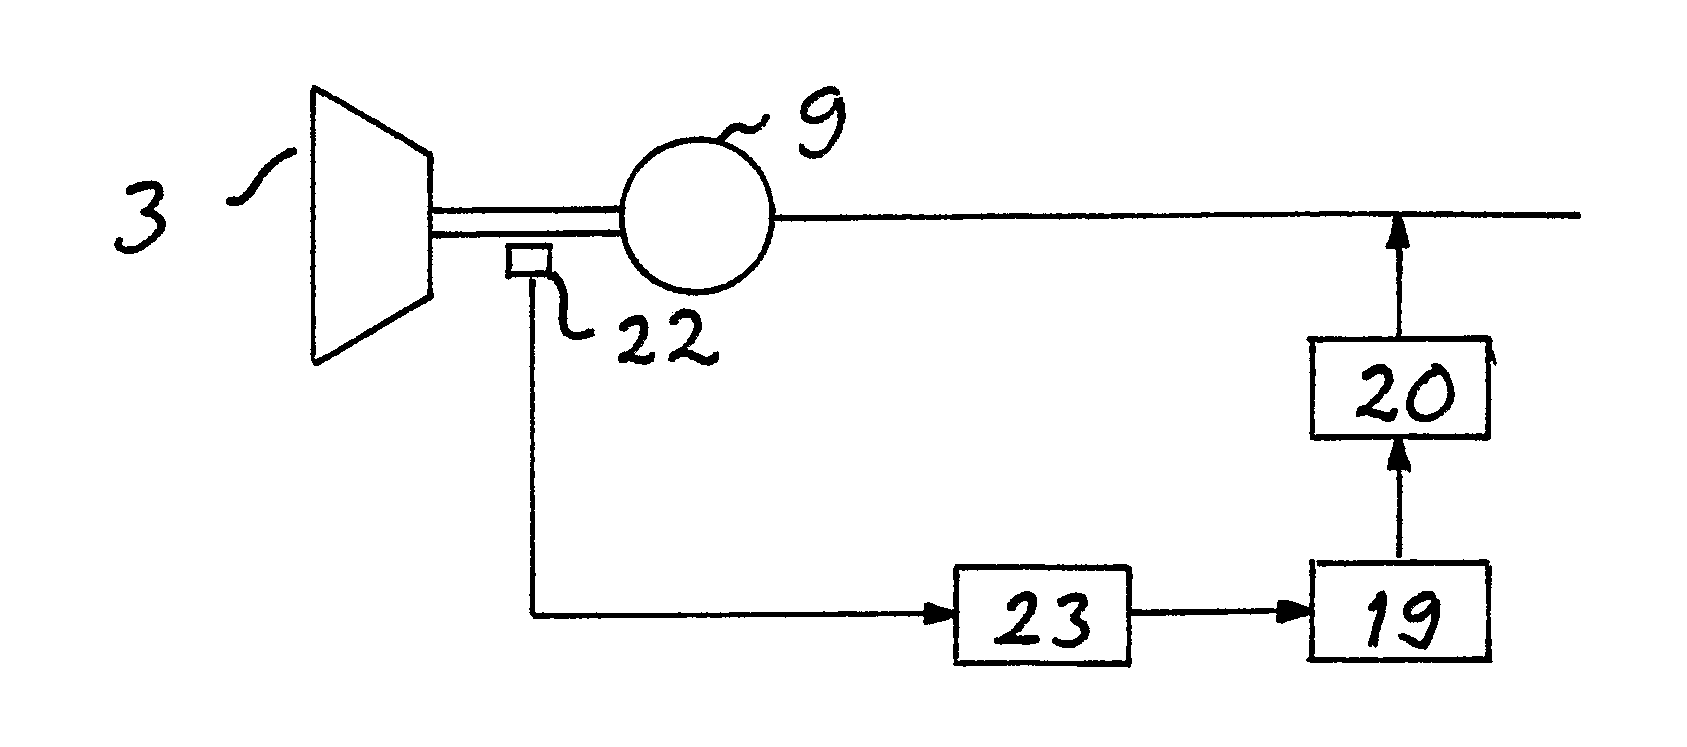 Apparatus and a method for a power transmission system